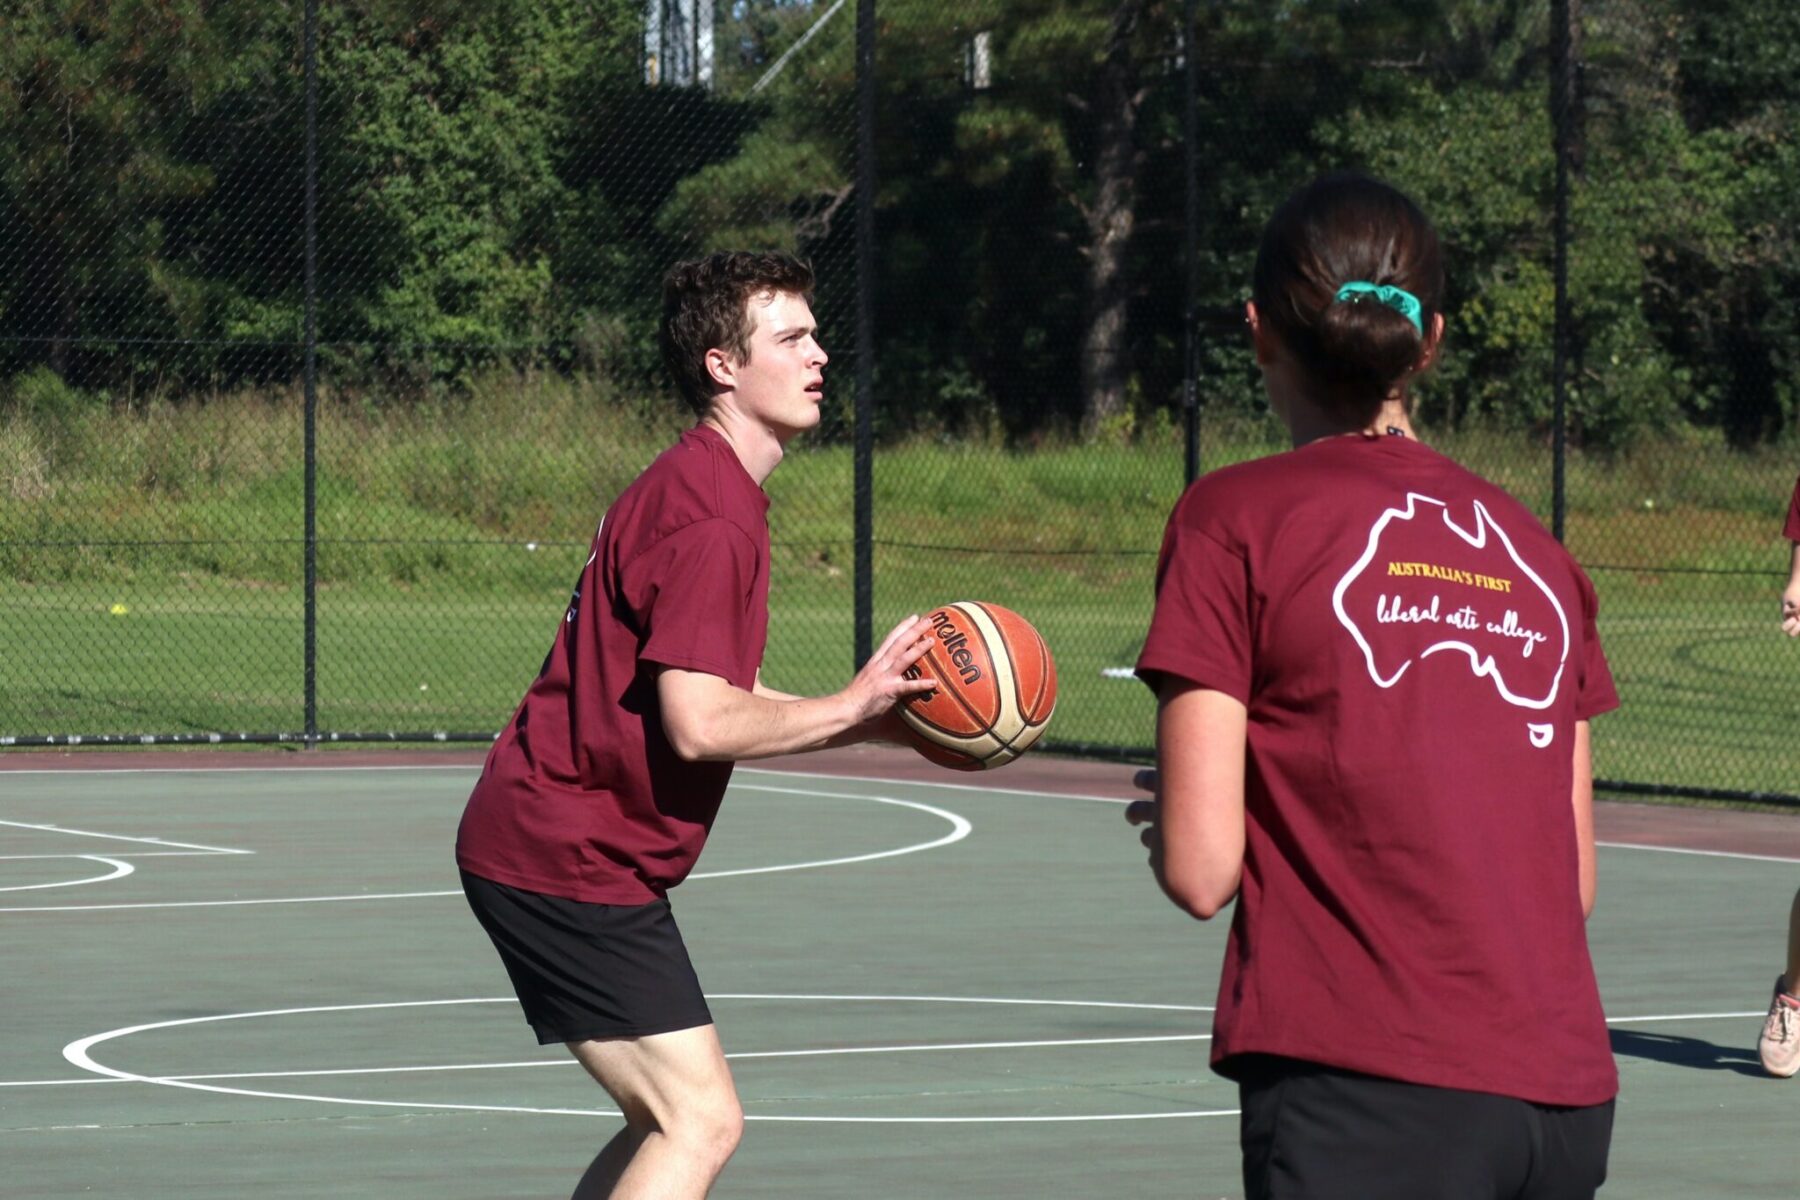 LIFTED-Sports-Day-May-2021-02-scaled-1. Campion College Australia.